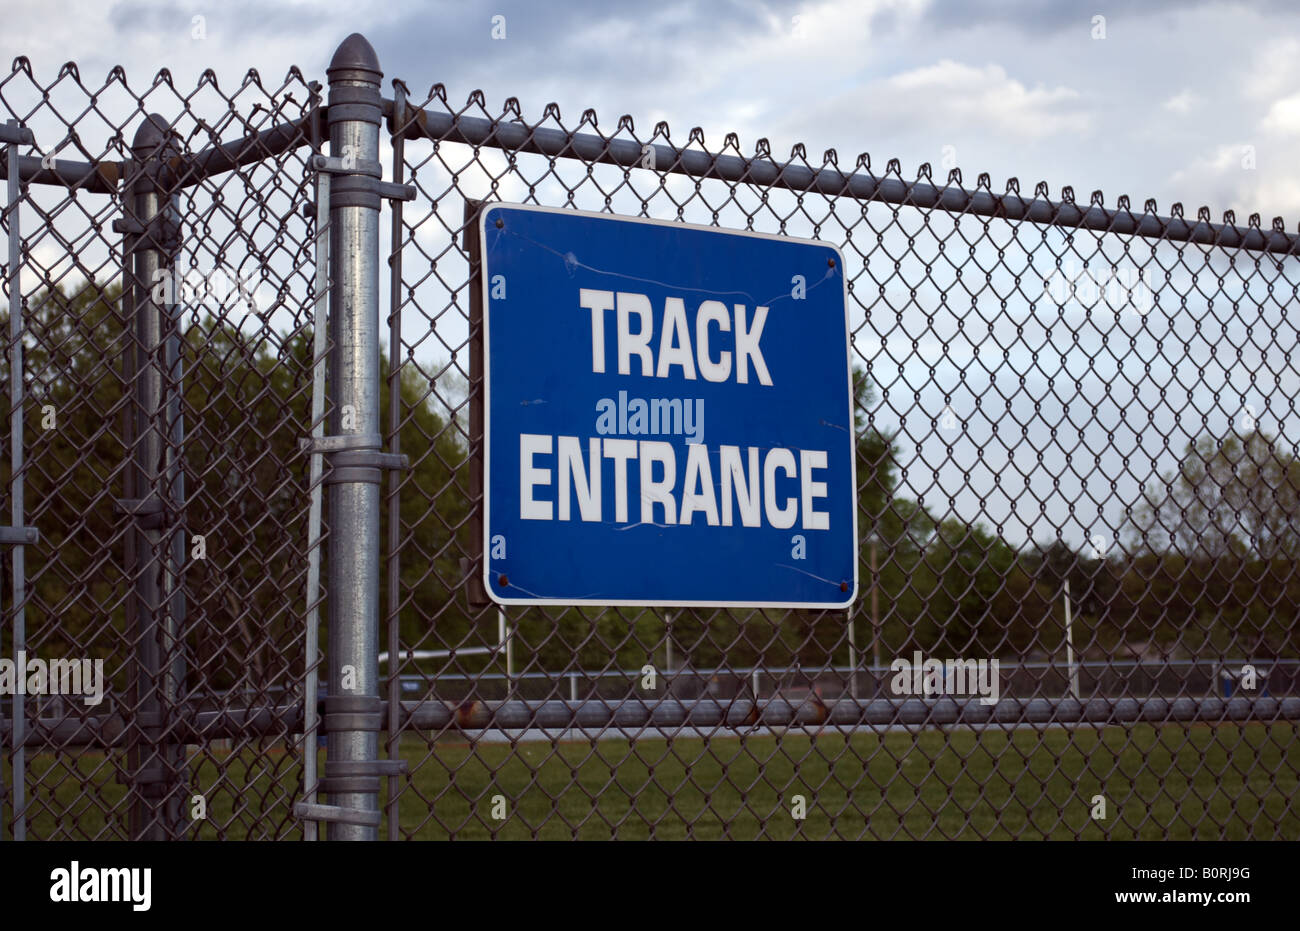 Track and field entrance Stock Photo